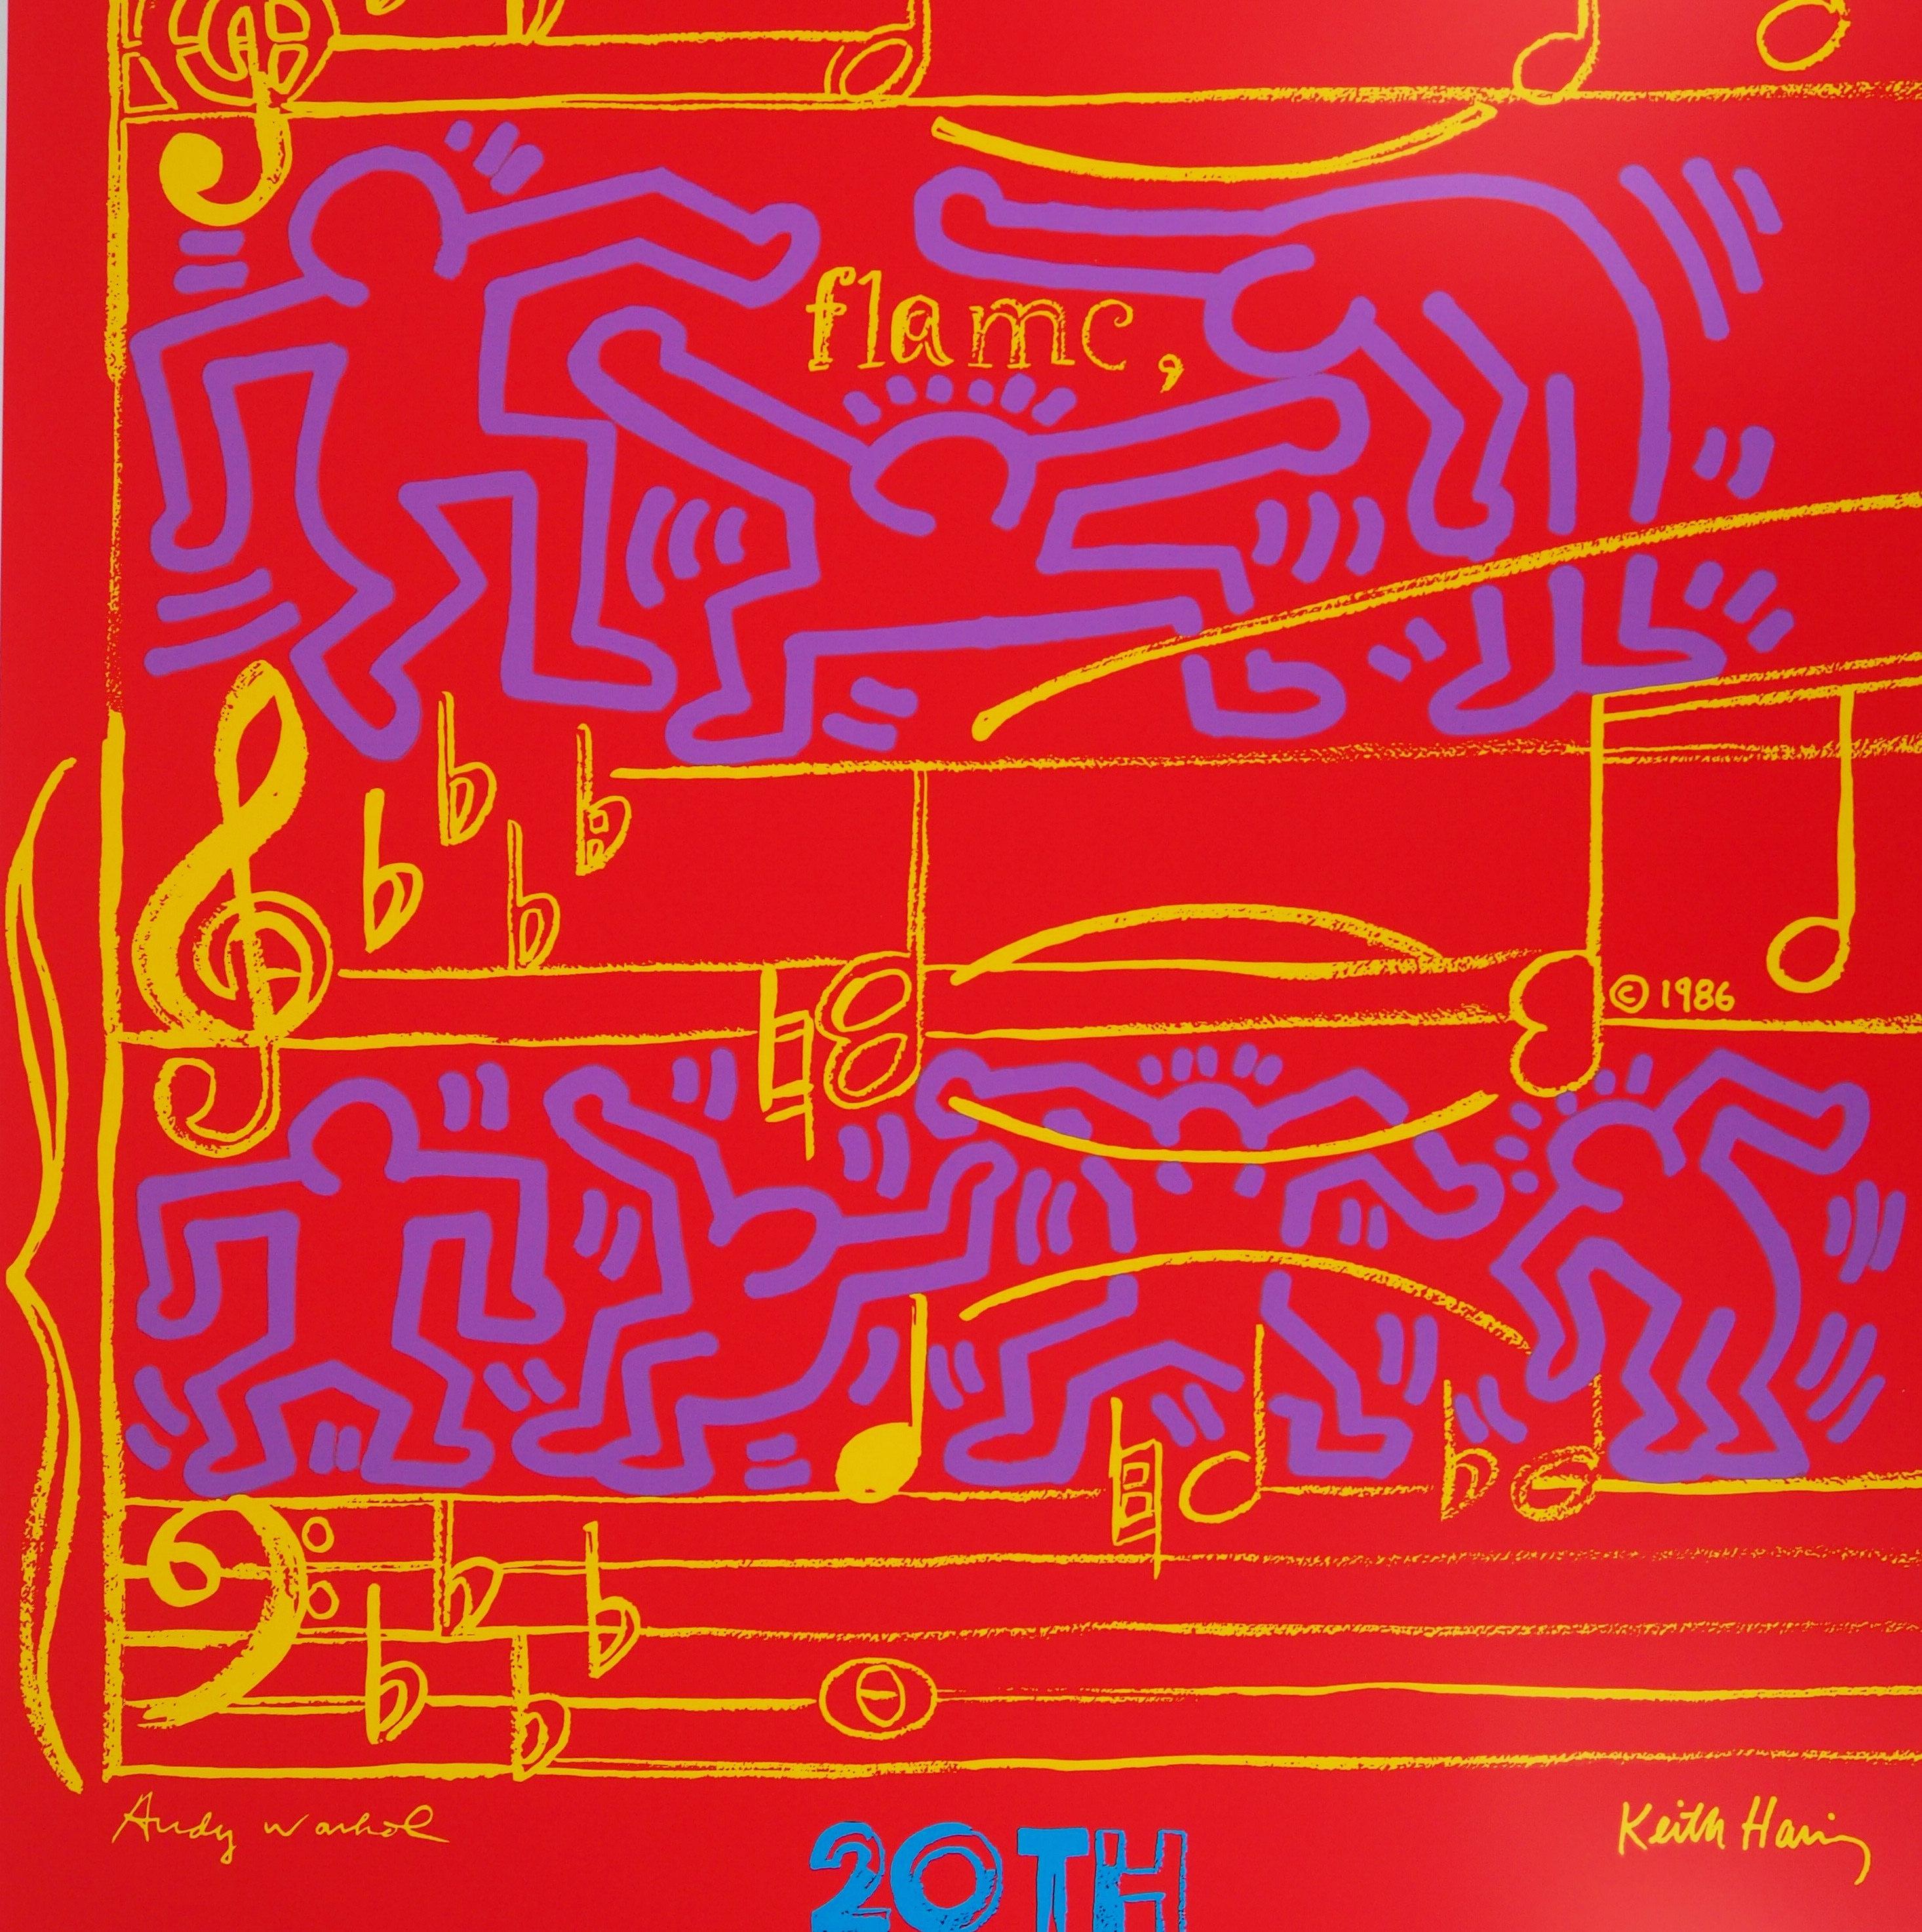 Andy WARHOL and Keith HARING
Jazz, Dancing on Music Sheet, 1986

Screenprint
Printed signature in the plate
On heavy paper 100 x 70 cm (c. 40 x 28 in)
Created by Haring for the Montreux Jazz Festival - vintage edition

Excellent condition